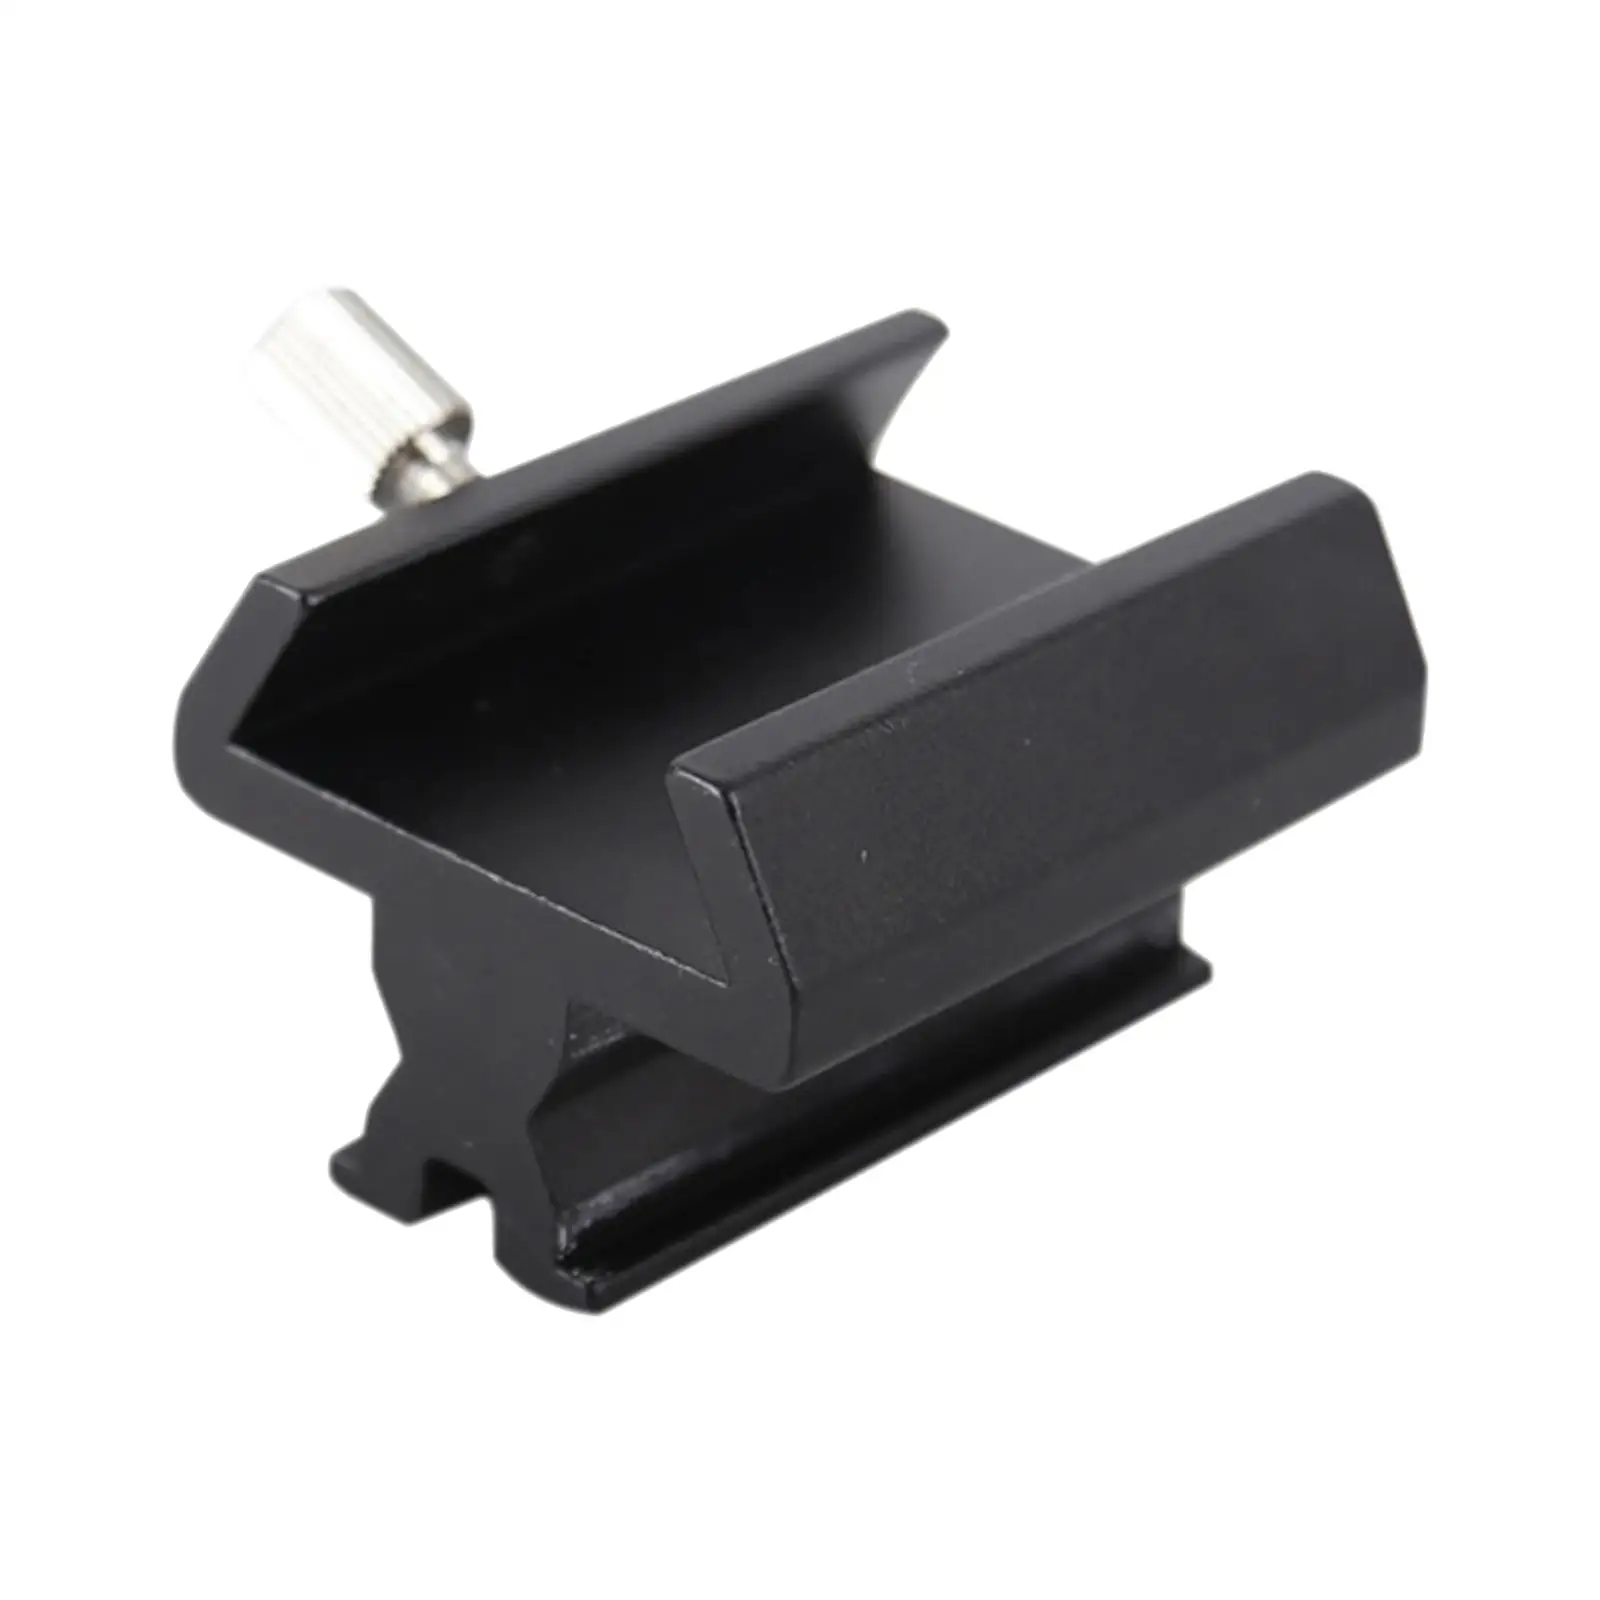 Dovetail Base for Finder Scope Metal Convenient Installation Dovetail